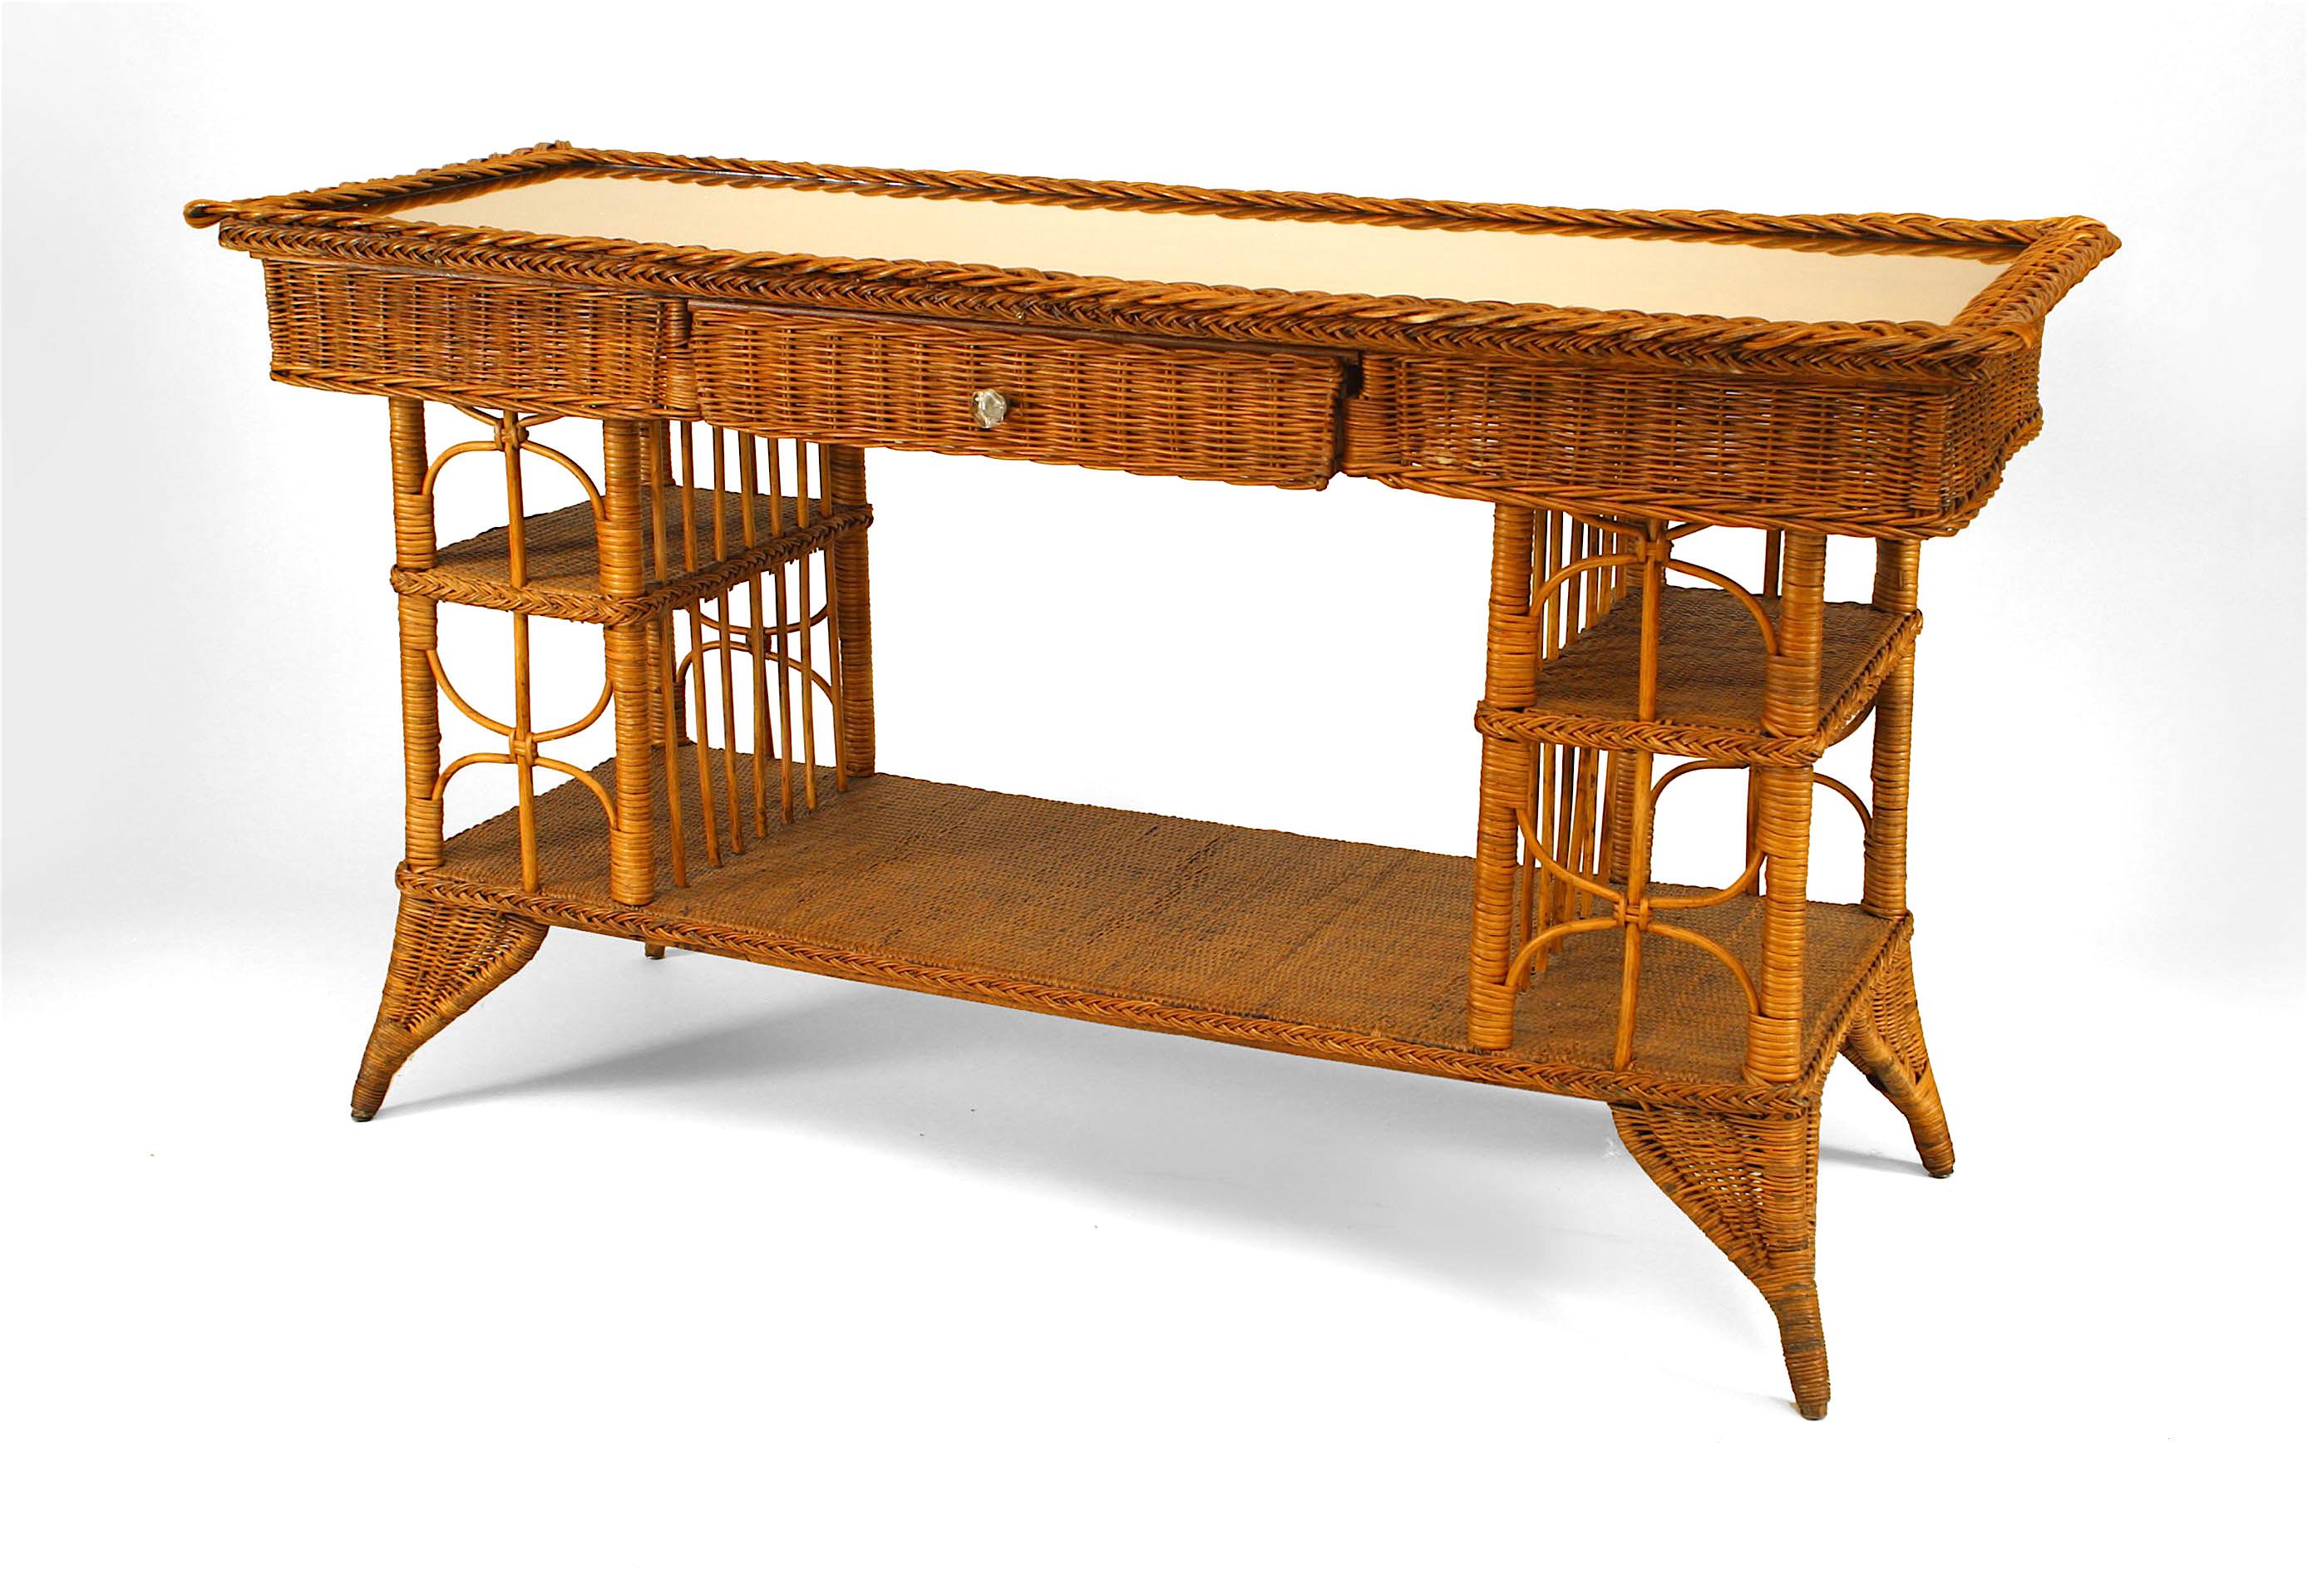 American Victorian natural wicker davenport table with drawer and side shelves with a glass panel over an oak top. (attributed to HAYWOOD-WAKEFIELD).
